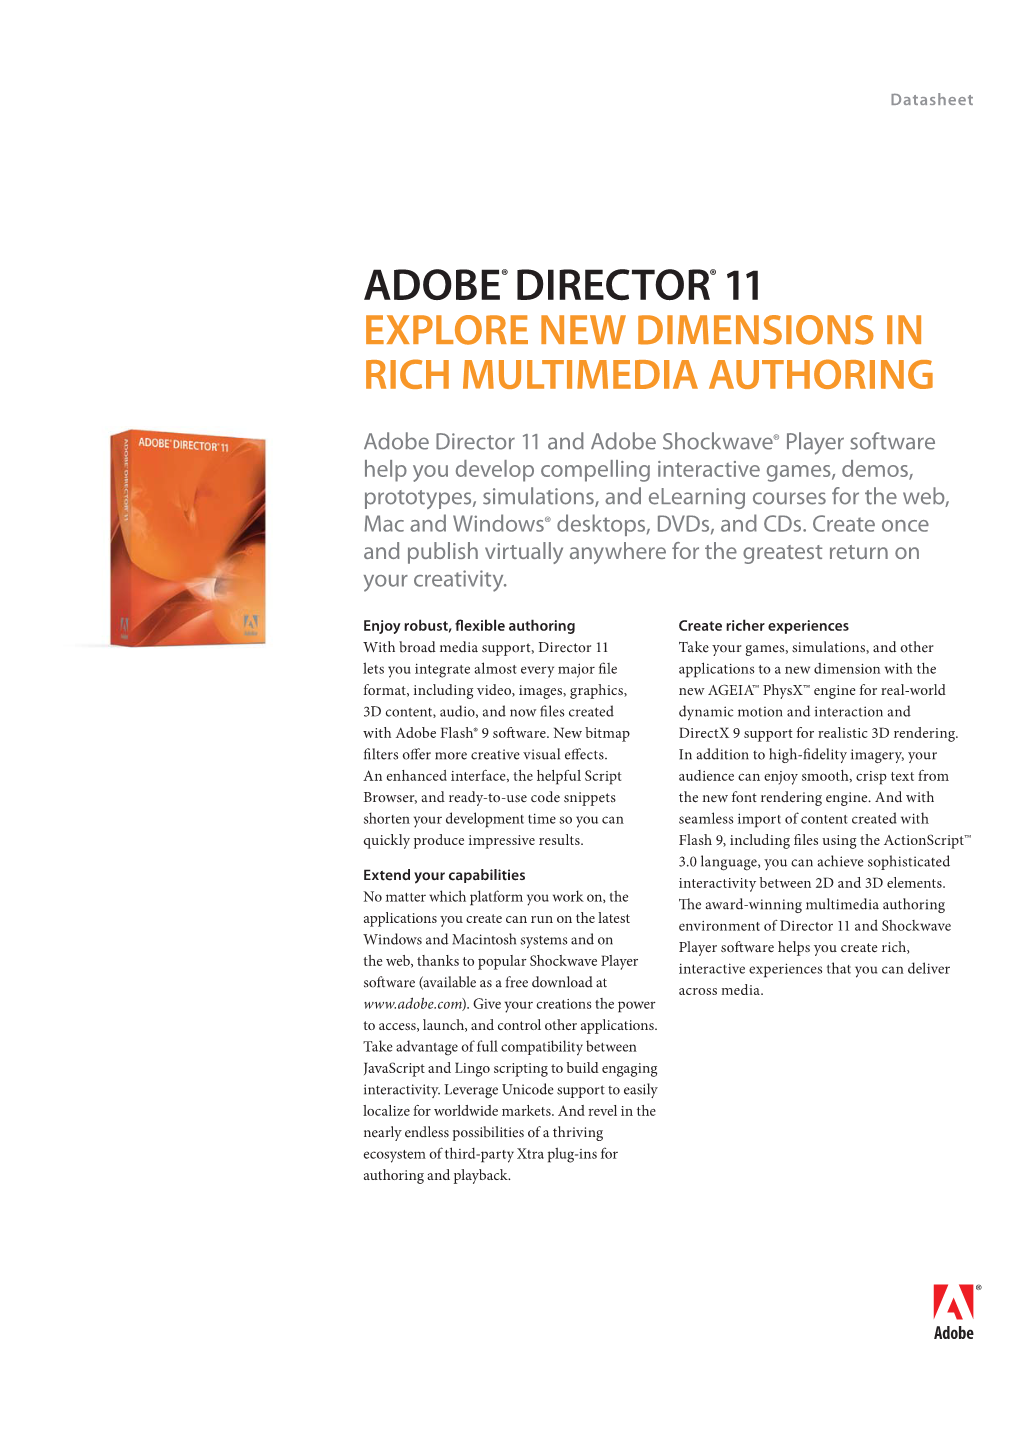 Adobe® Director® 11 Explore New Dimensions in Rich Multimedia Authoring